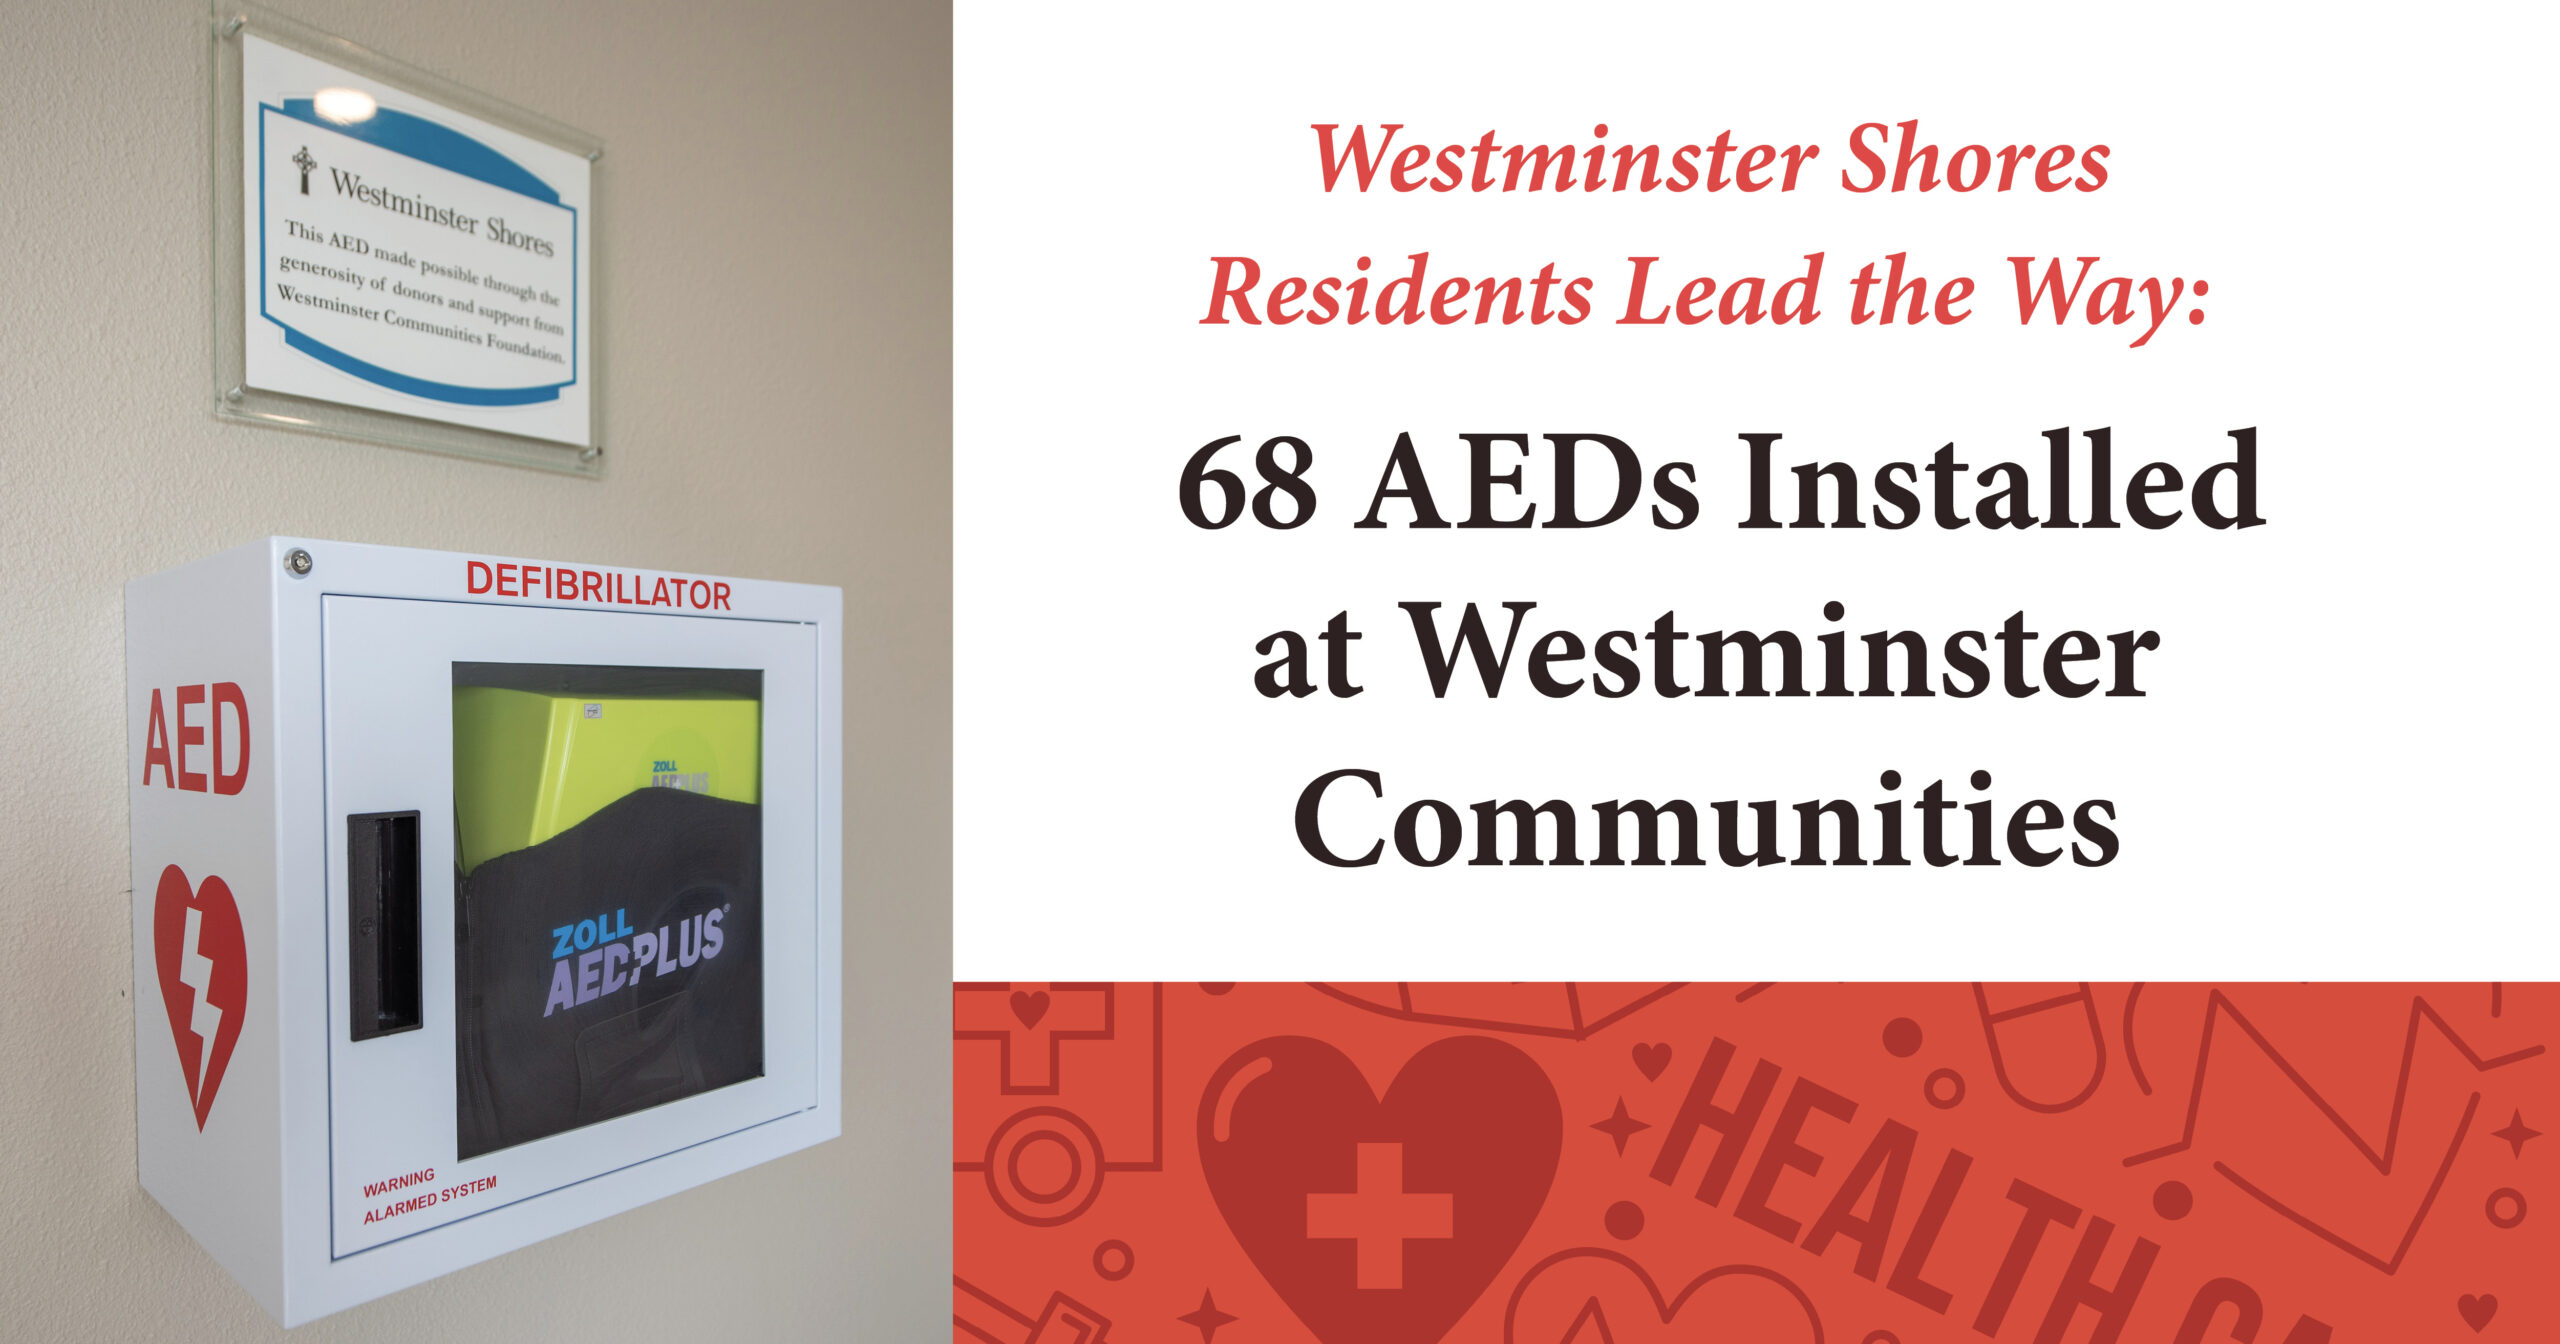 Westminster Shores Residents Lead the Way: 68 AEDs Installed at Westminster Communities